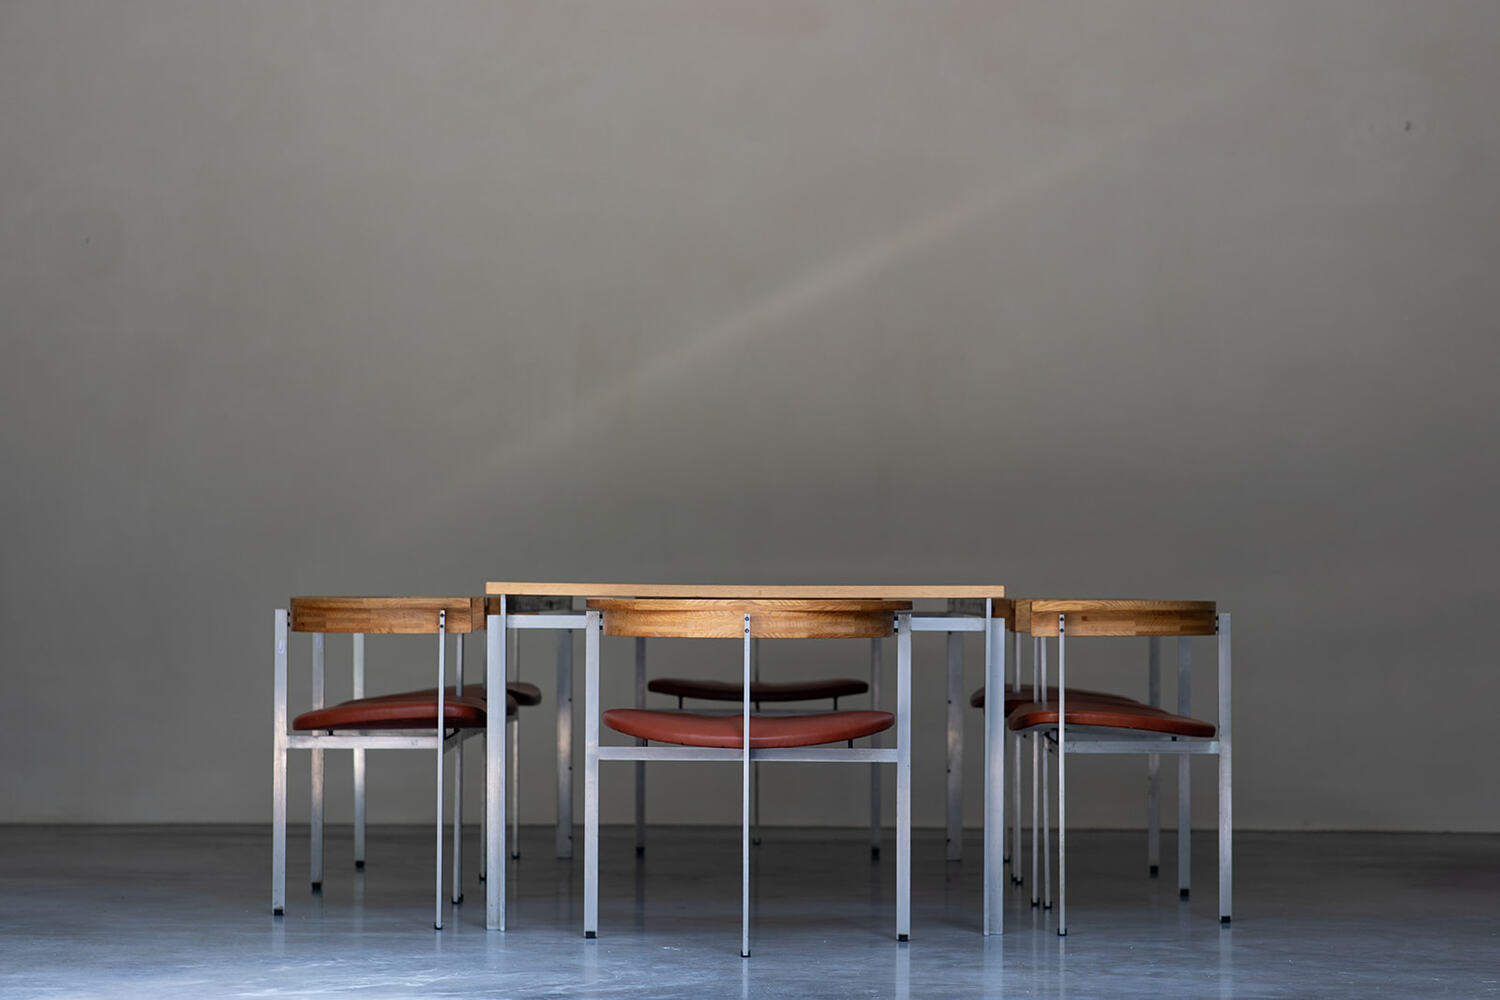 Poul Kjaerholm set of PK11 chairs and PK53 table